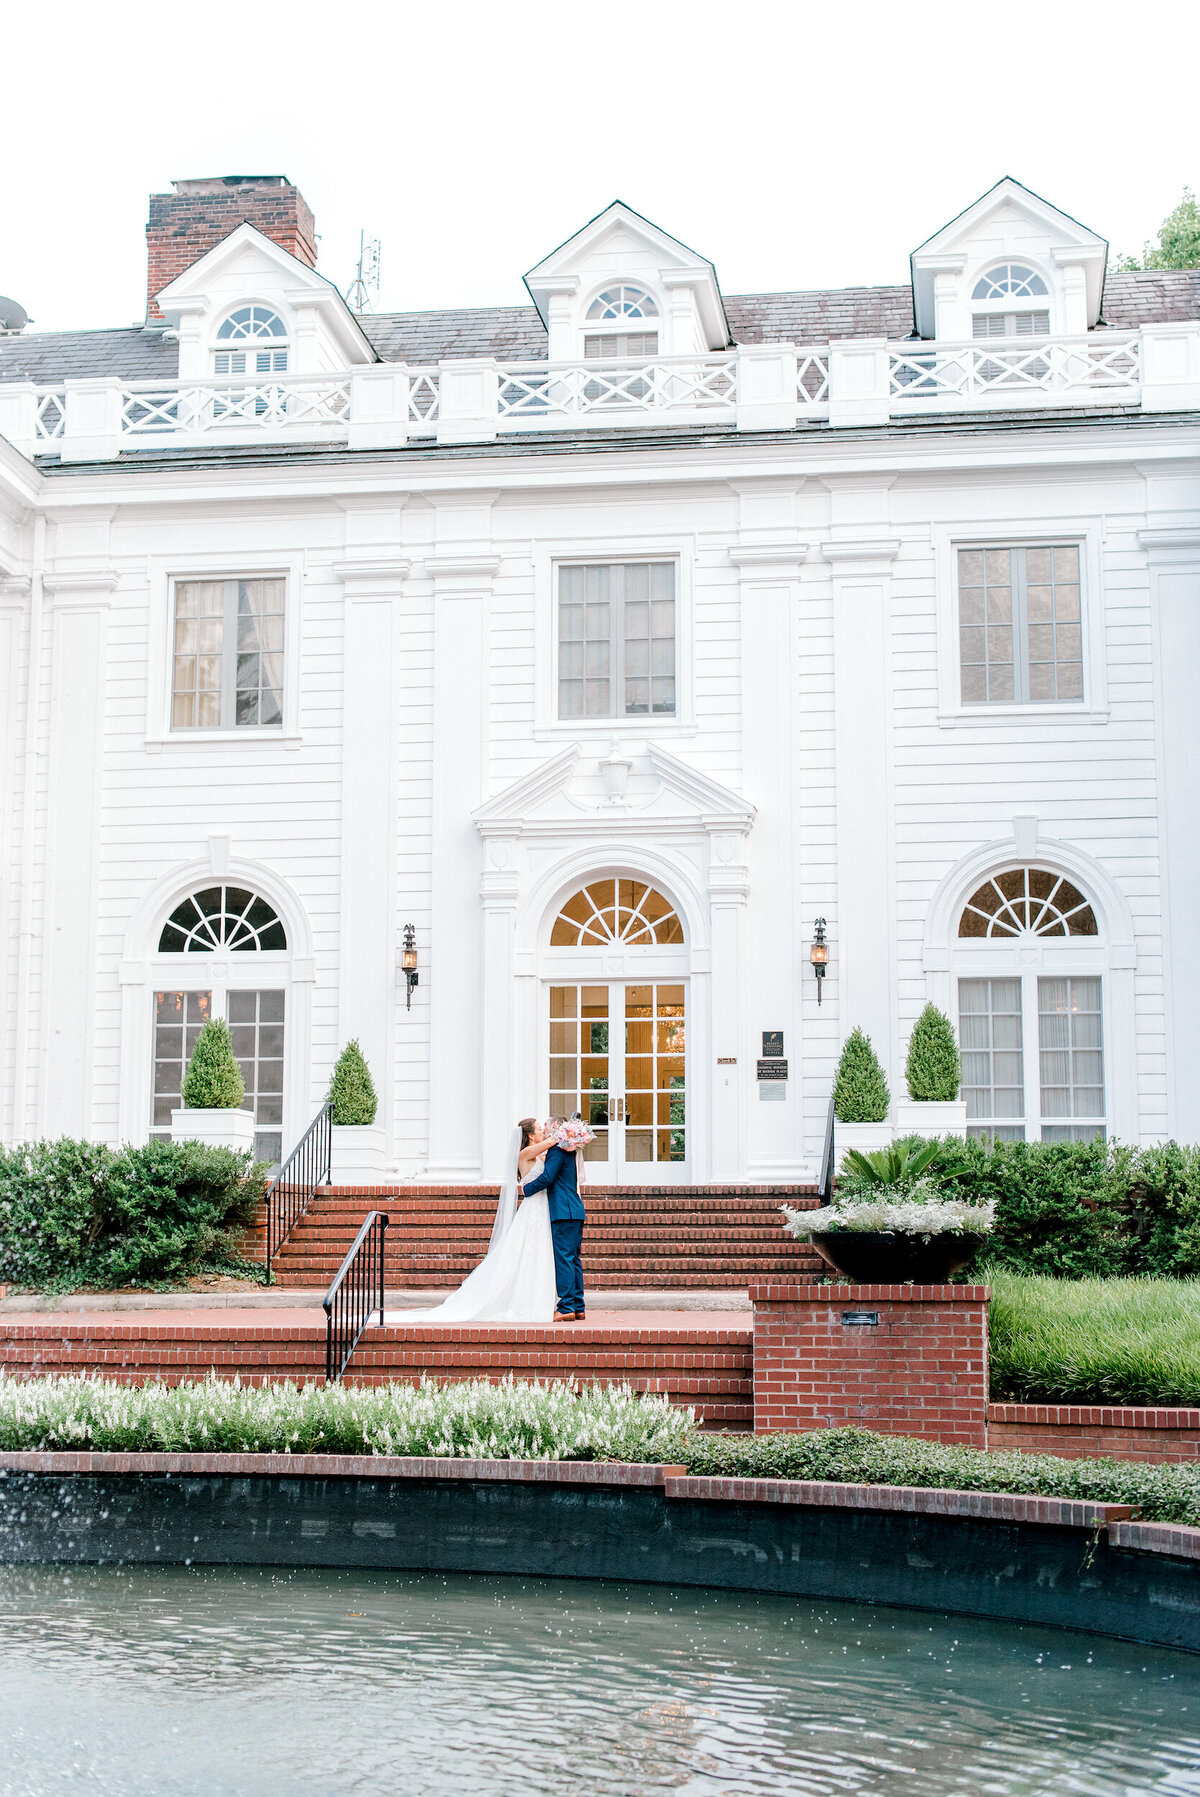 Daren-and-Stacy-Duke-Mansion-Wedding-Charlotte-NC-Uptown-Bright-and-Airy-Wedding-Photography-Alyssa-Frost-Photography-553